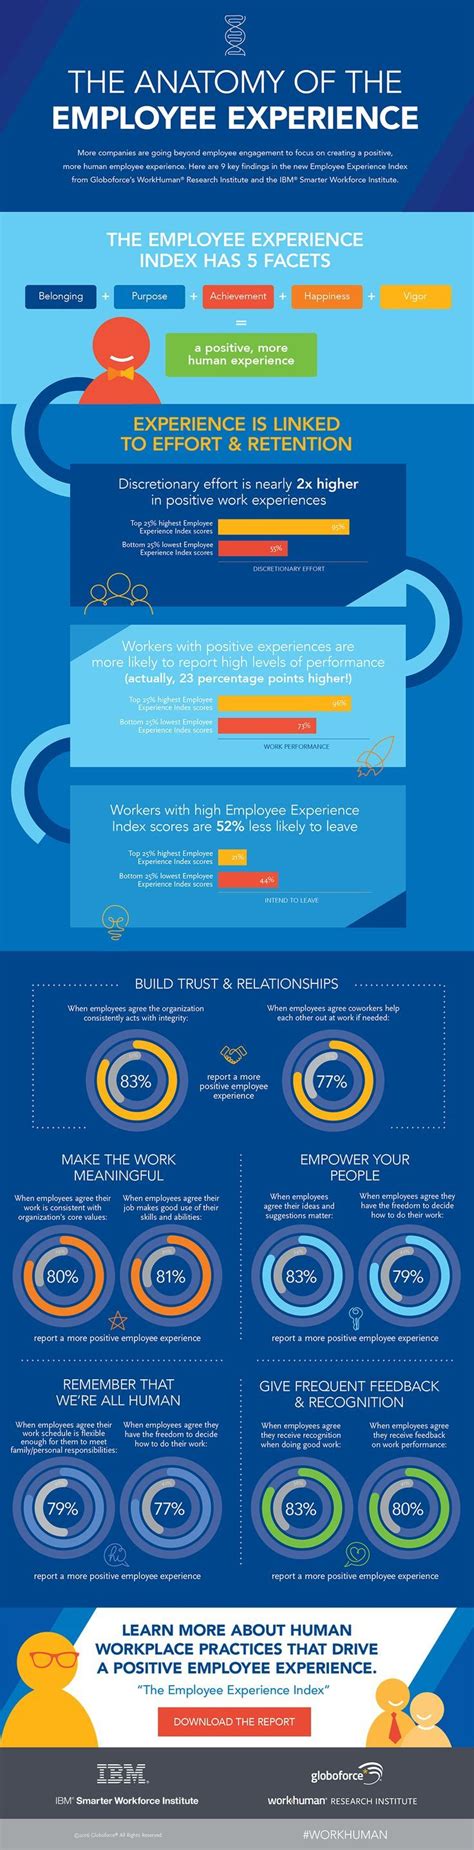 Management : [INFOGRAPHIC] The Anatomy of Employee Experience ...